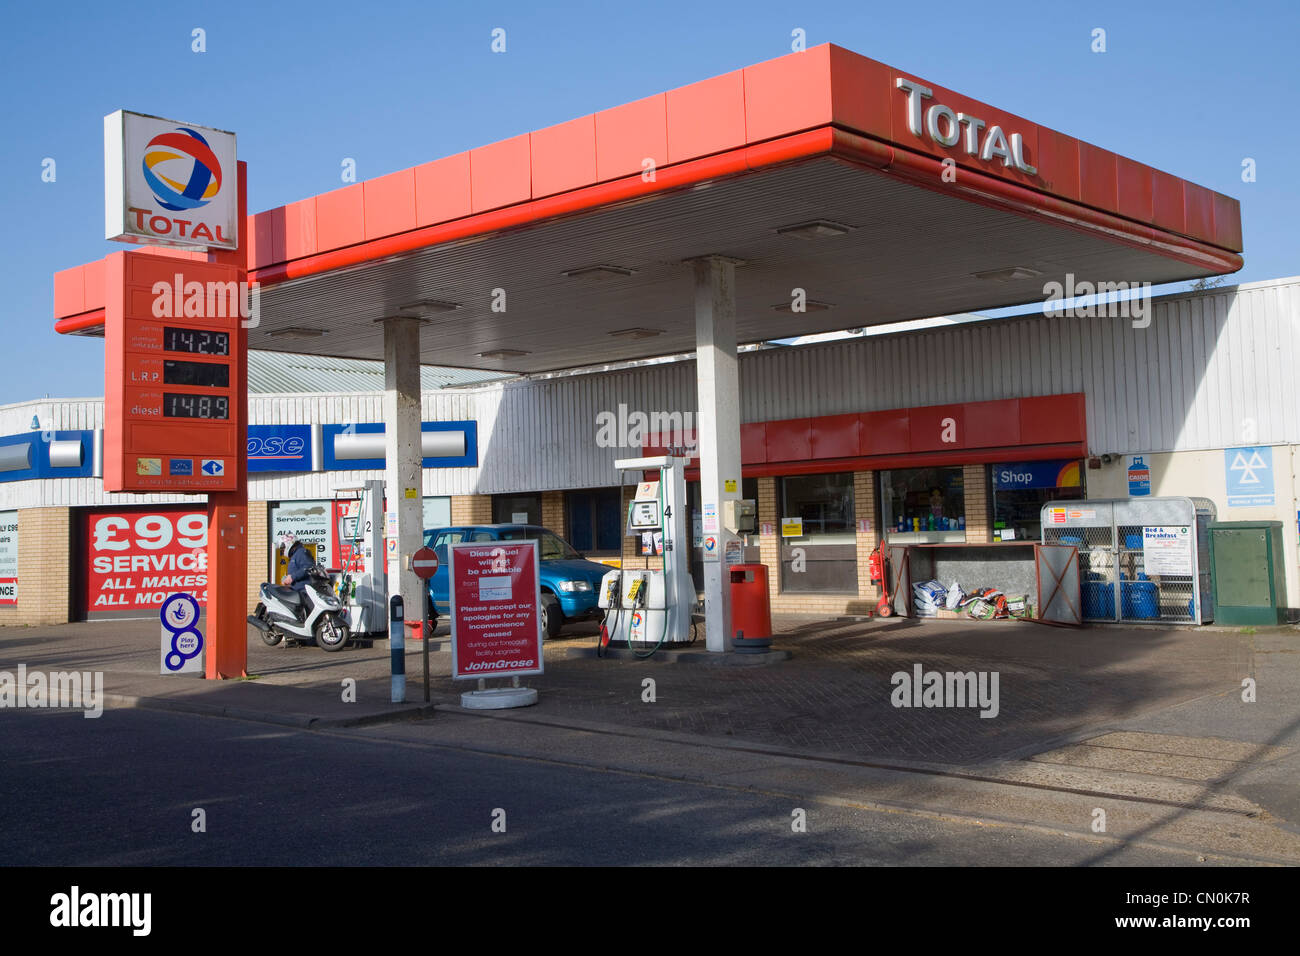 Carburant diesel non disponible station essence Total sign Photo Stock -  Alamy